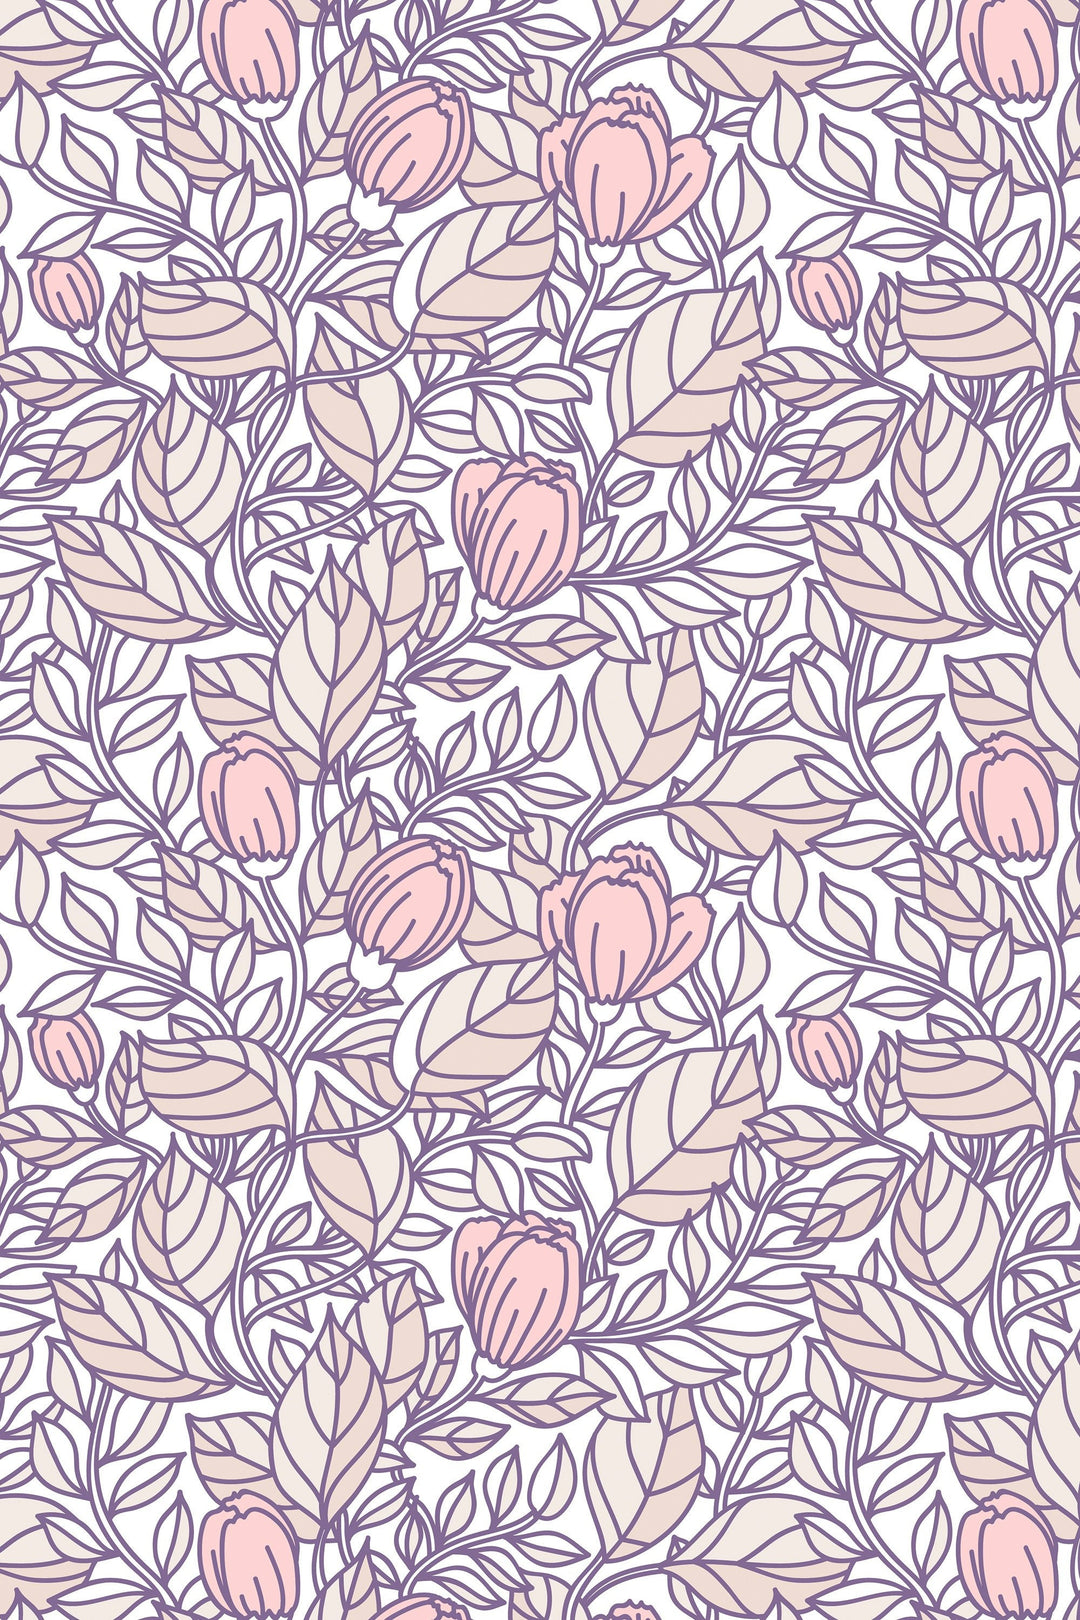 Buds floral pattern wallpaper design#3060- peel and stick removable self adhesive and traditional wallpaper